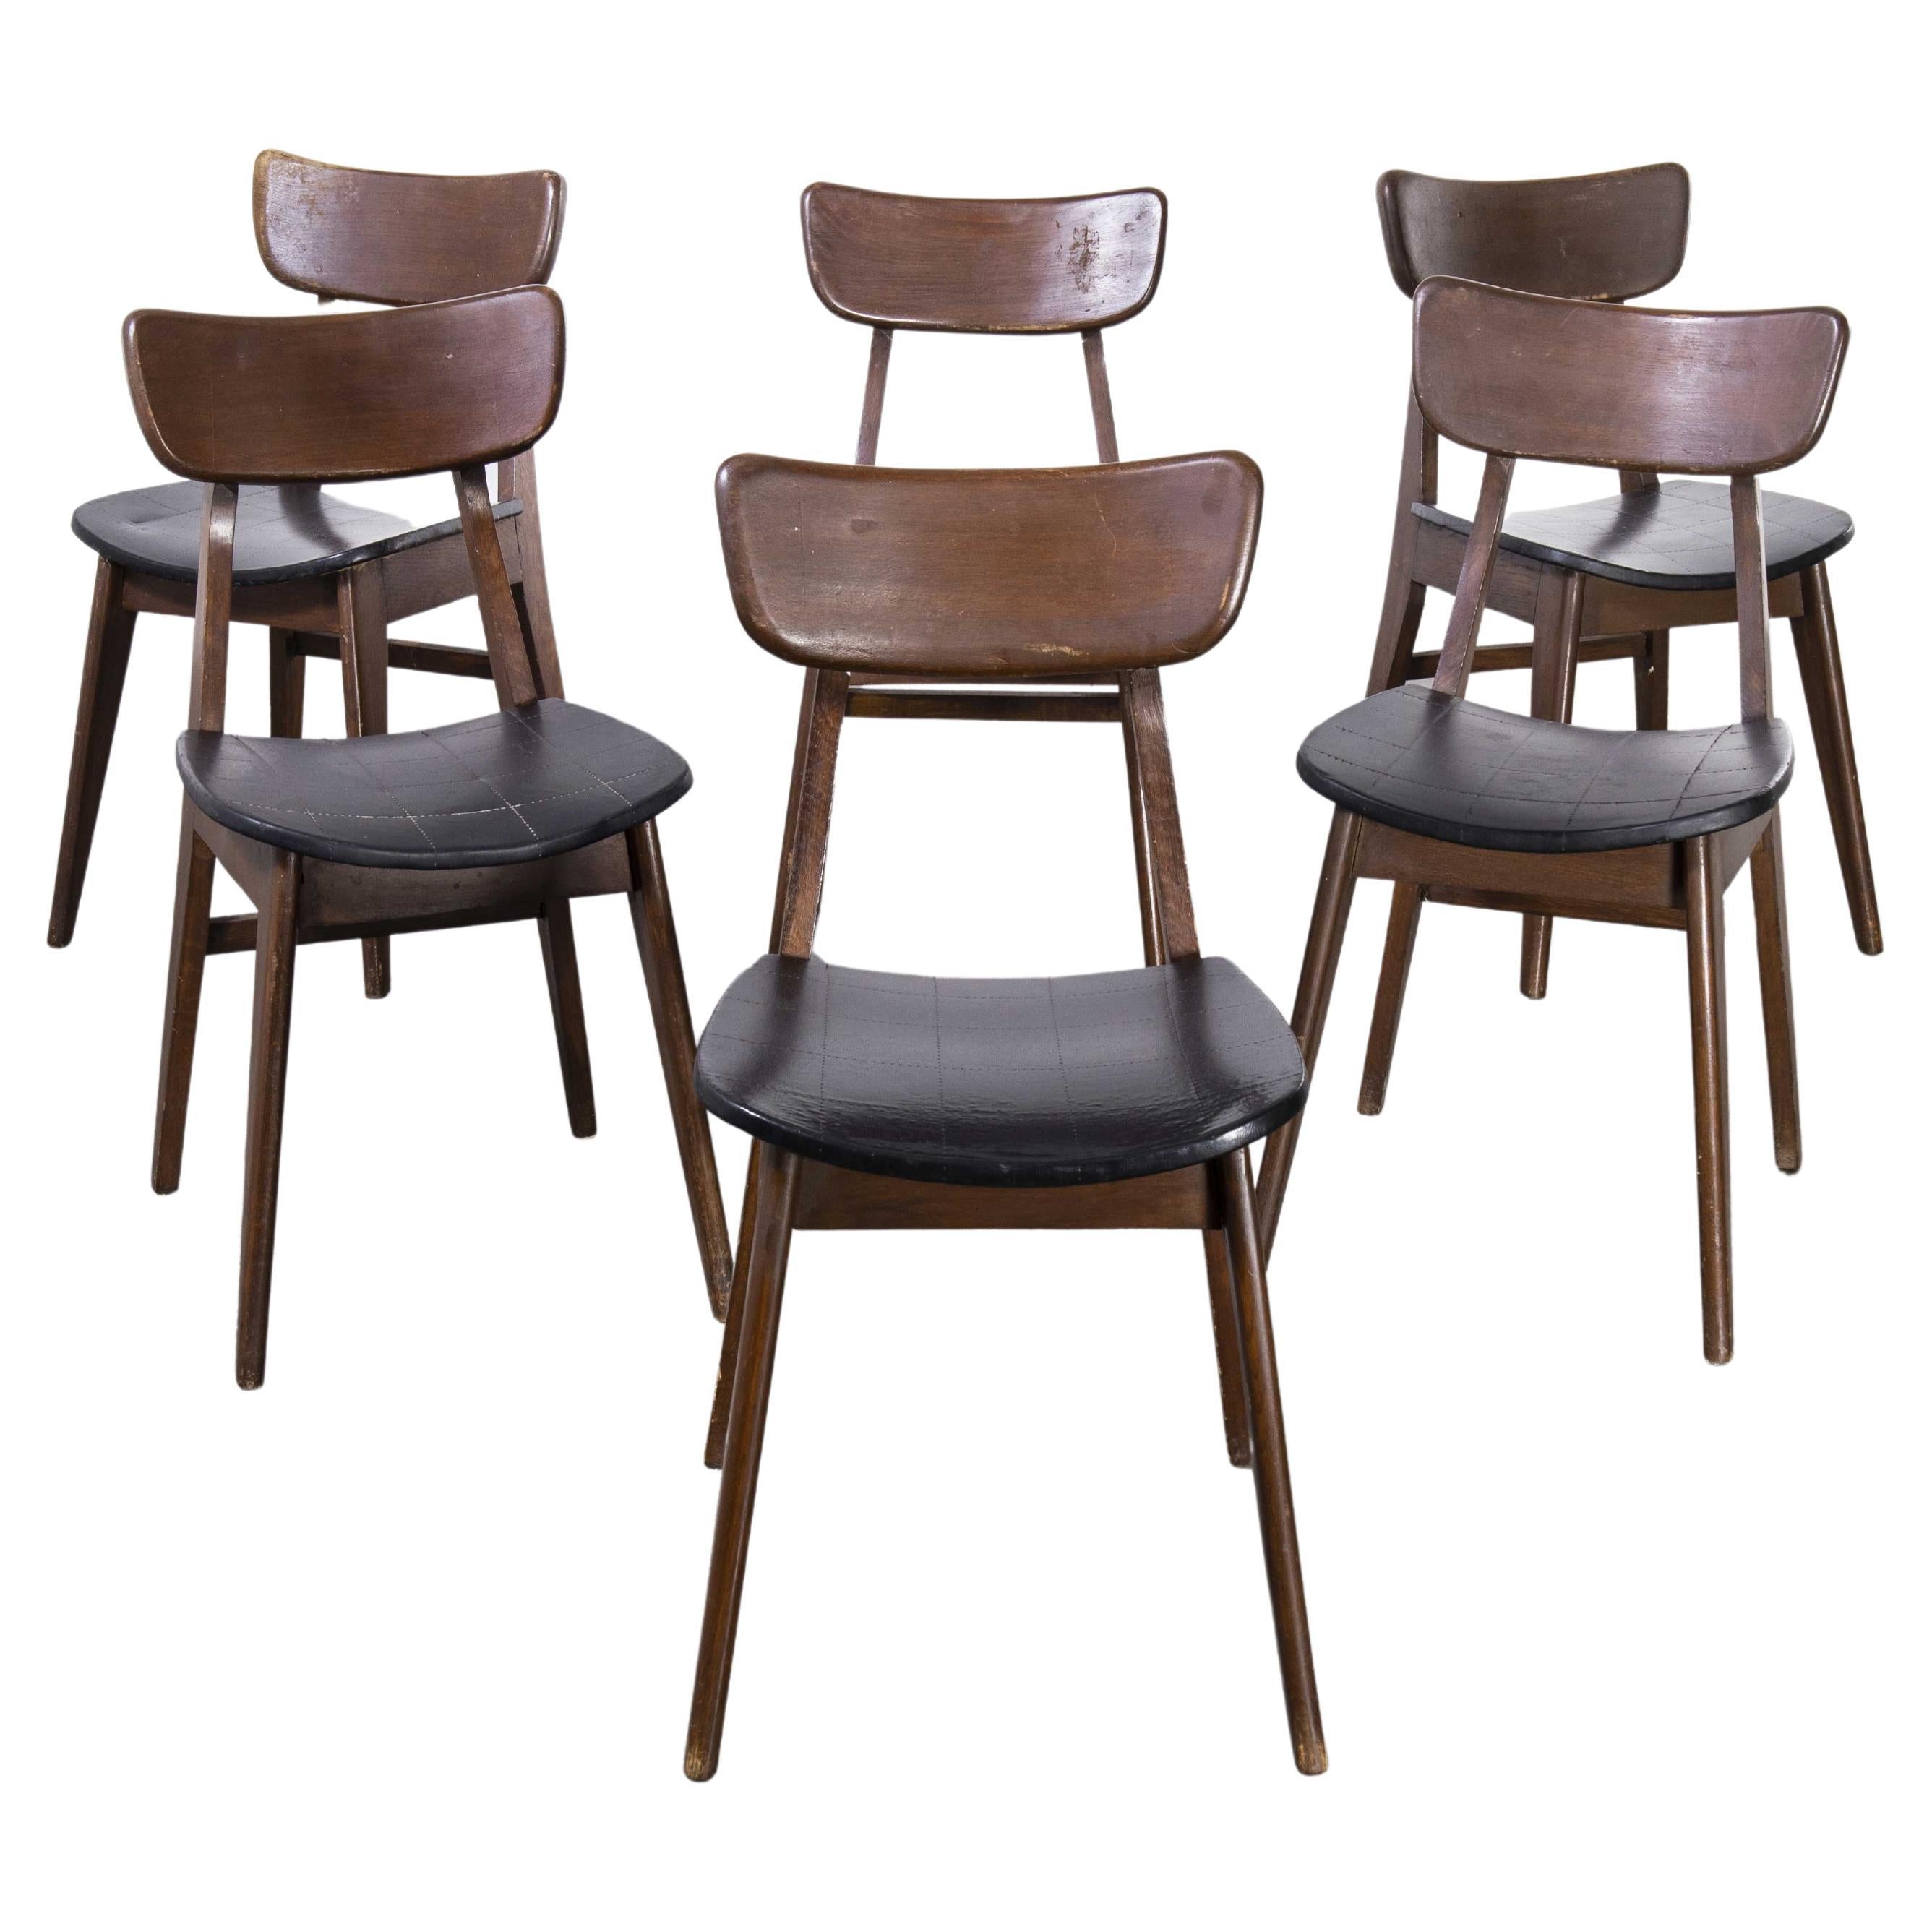 1960's French Original Mid Century Saddle Seat Dining Chairs, Set Of Six